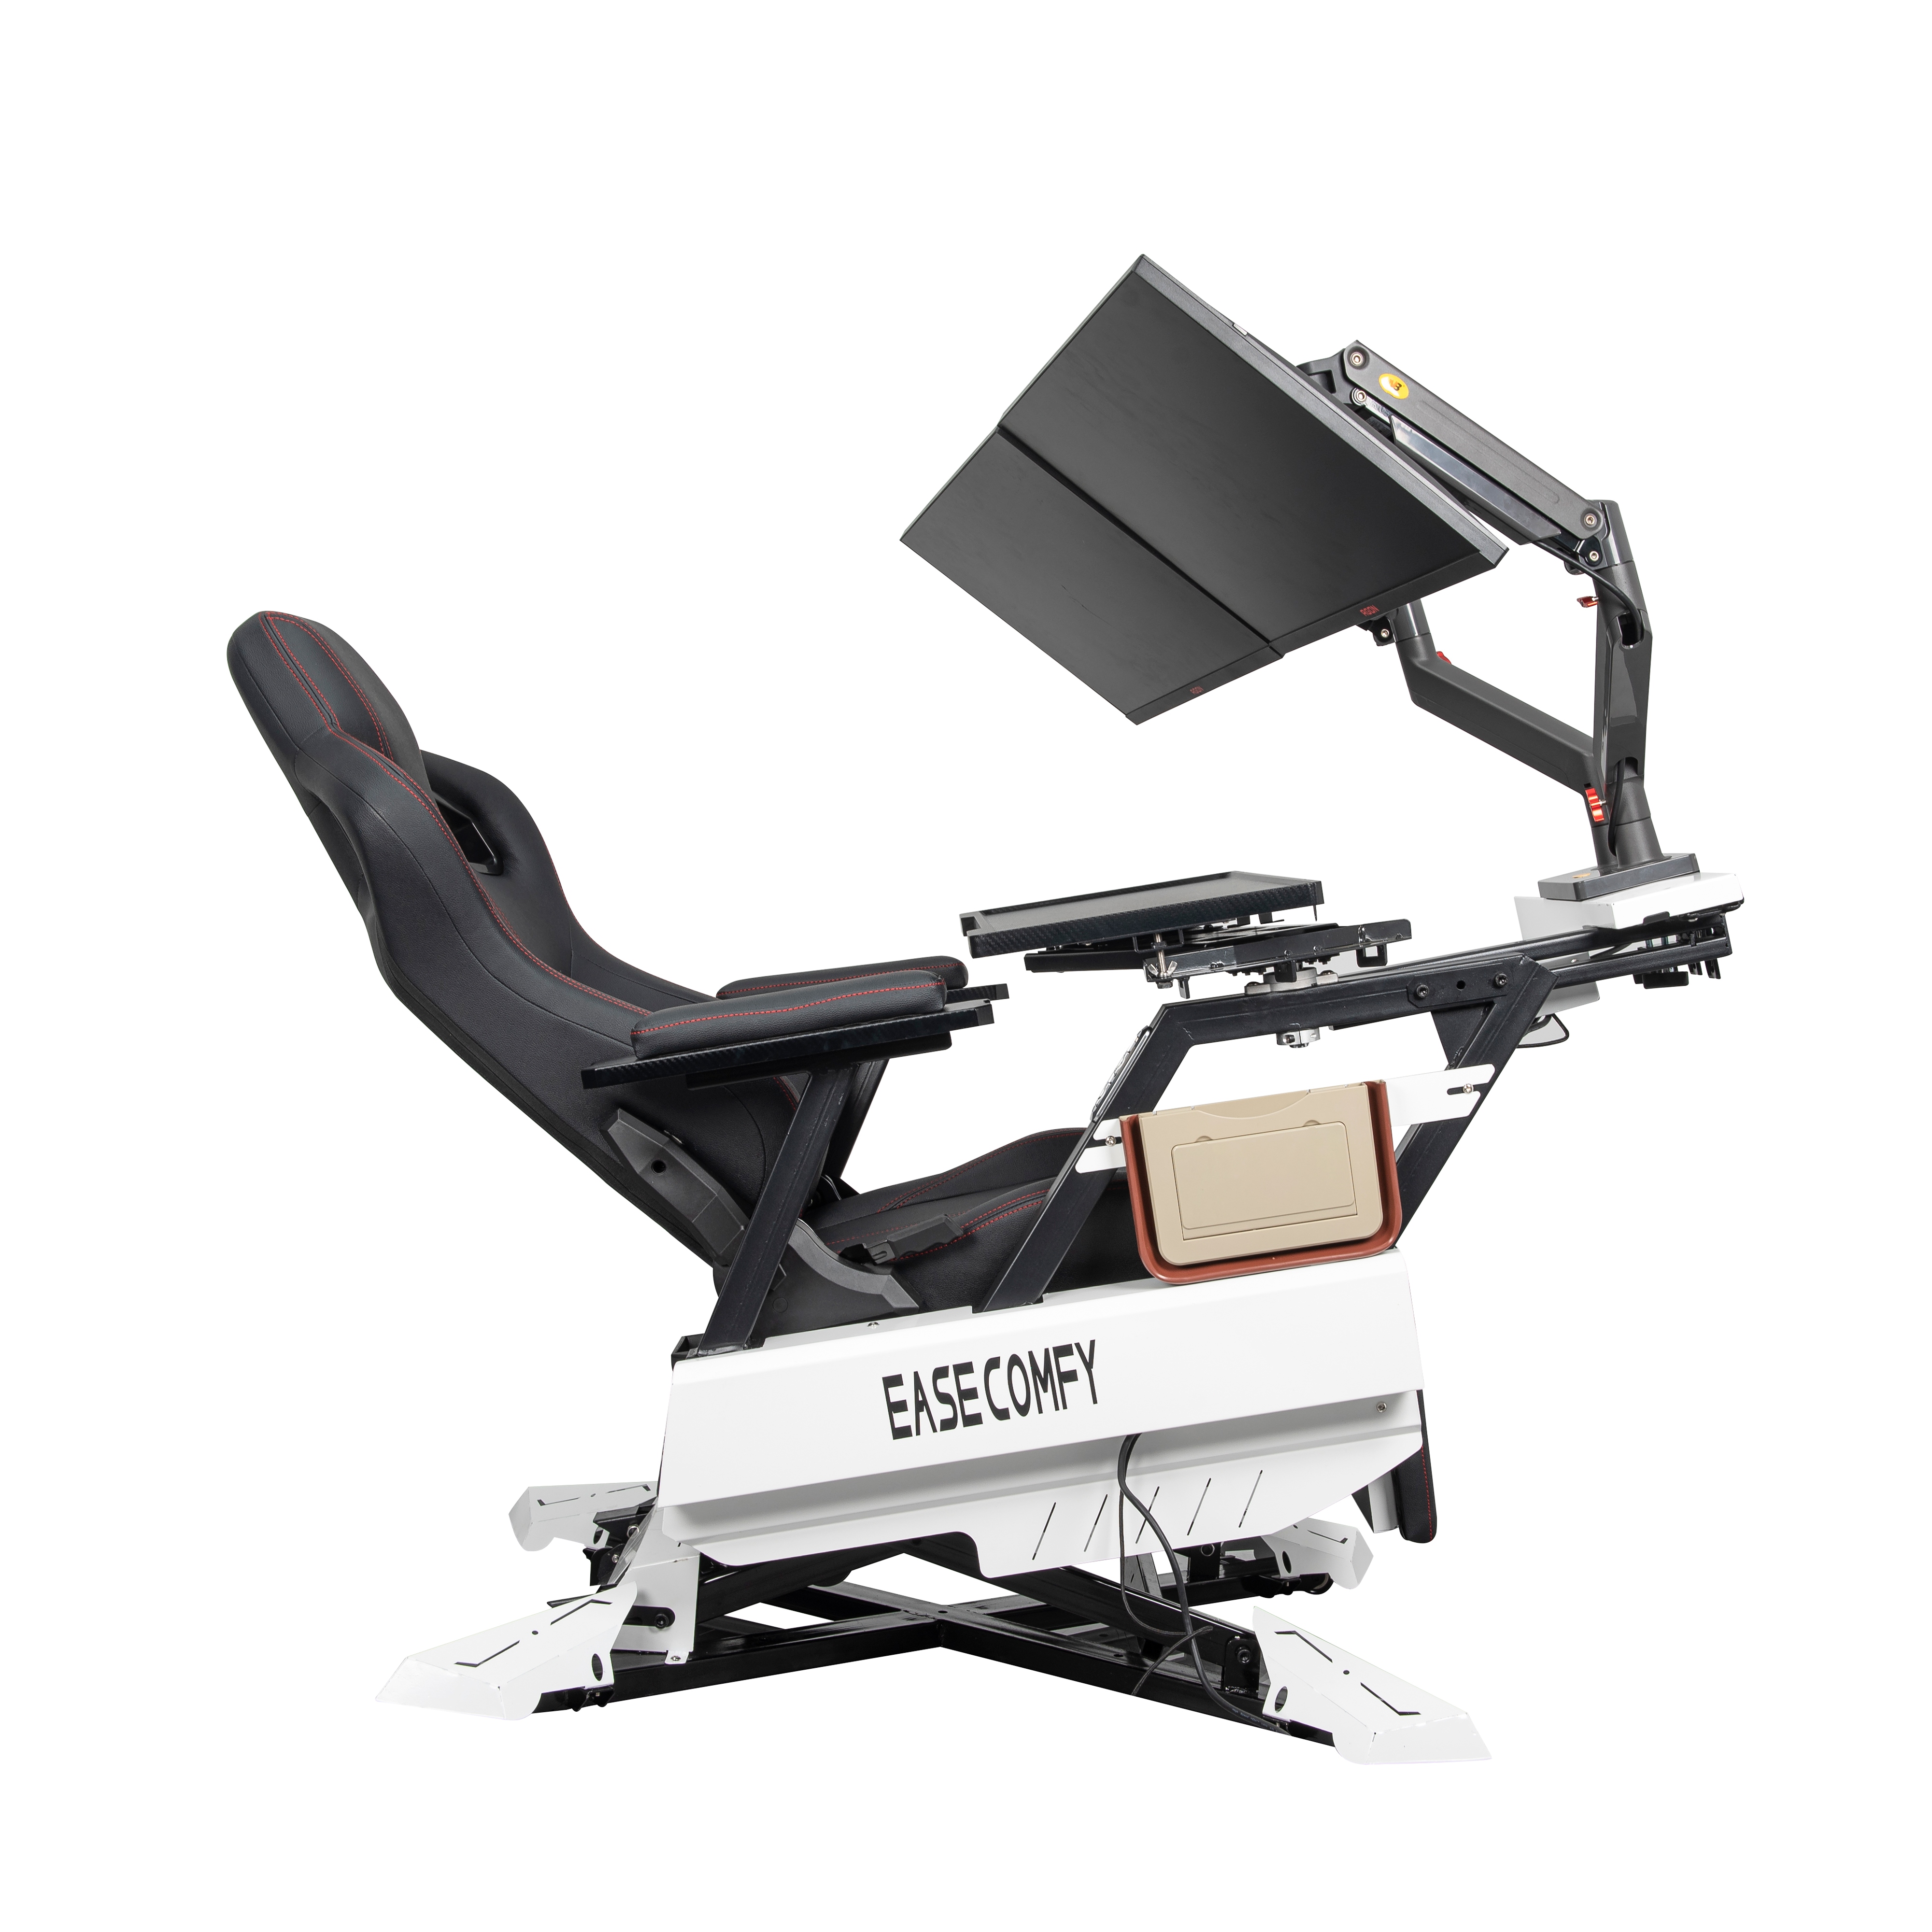 https://www.easecomfy.com/products/2024EASEPOD-CheapestCockpitworkstationchairforallhomeandofficeuse.html